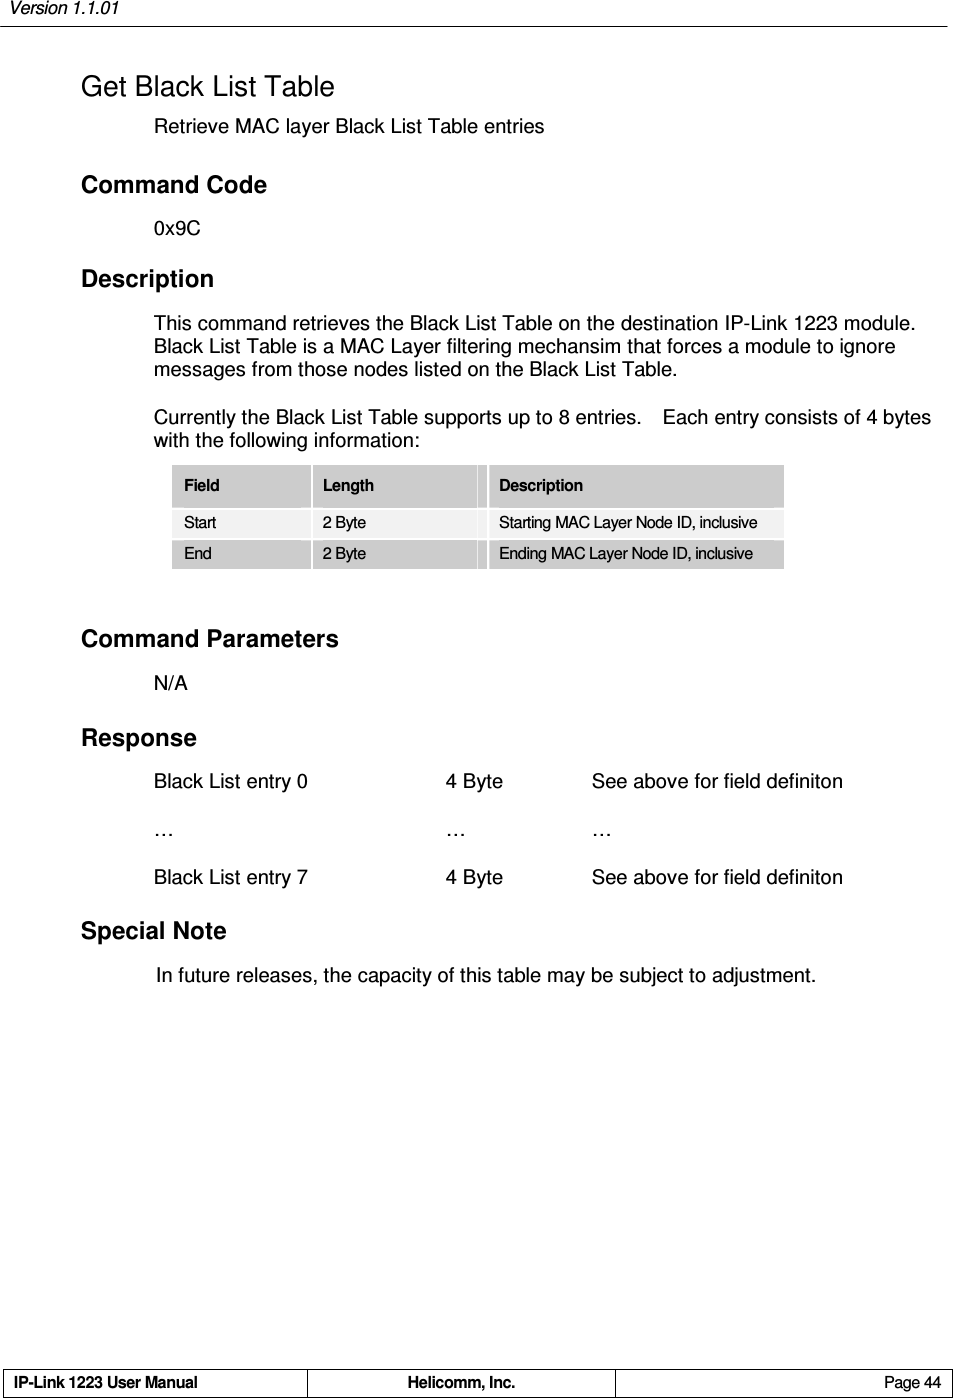 Version 1.1.01     IP-Link 1223 User Manual  Helicomm, Inc.  Page 44   Get Black List Table Retrieve MAC layer Black List Table entries Command Code 0x9C Description This command retrieves the Black List Table on the destination IP-Link 1223 module.   Black List Table is a MAC Layer filtering mechansim that forces a module to ignore messages from those nodes listed on the Black List Table.     Currently the Black List Table supports up to 8 entries.    Each entry consists of 4 bytes with the following information: Field  Length  Description Start  2 Byte  Starting MAC Layer Node ID, inclusive End  2 Byte      Ending MAC Layer Node ID, inclusive  Command Parameters N/A Response   Black List entry 0    4 Byte    See above for field definiton …        …    … Black List entry 7    4 Byte     See above for field definiton Special Note In future releases, the capacity of this table may be subject to adjustment. 